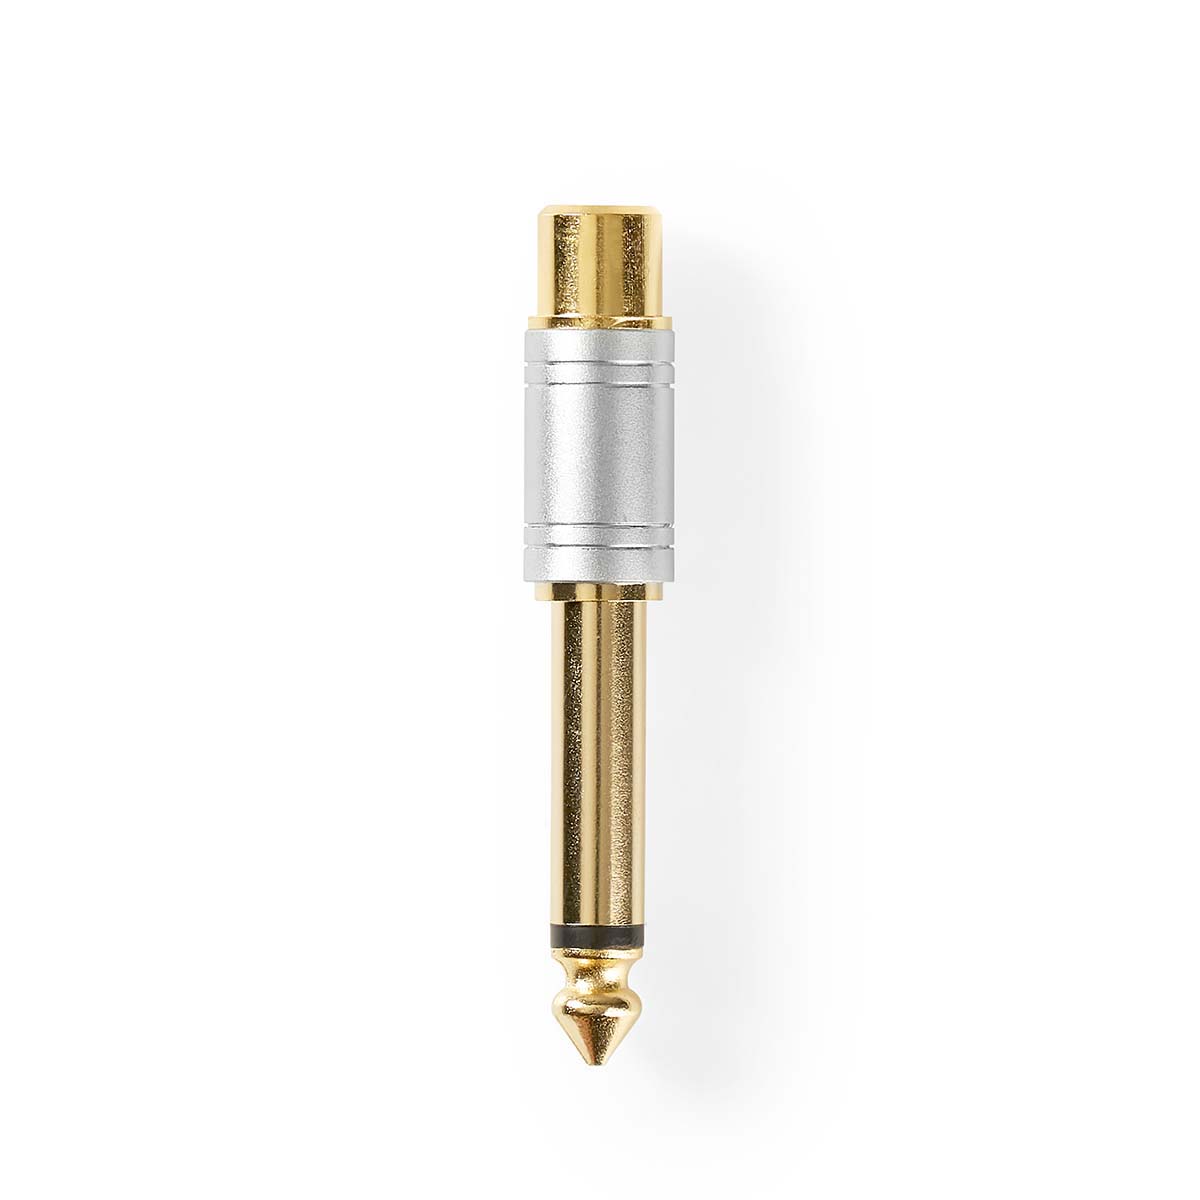 HQ 6.33mm Jack Mono Male to RCA Adapter 24K gold plated adapter